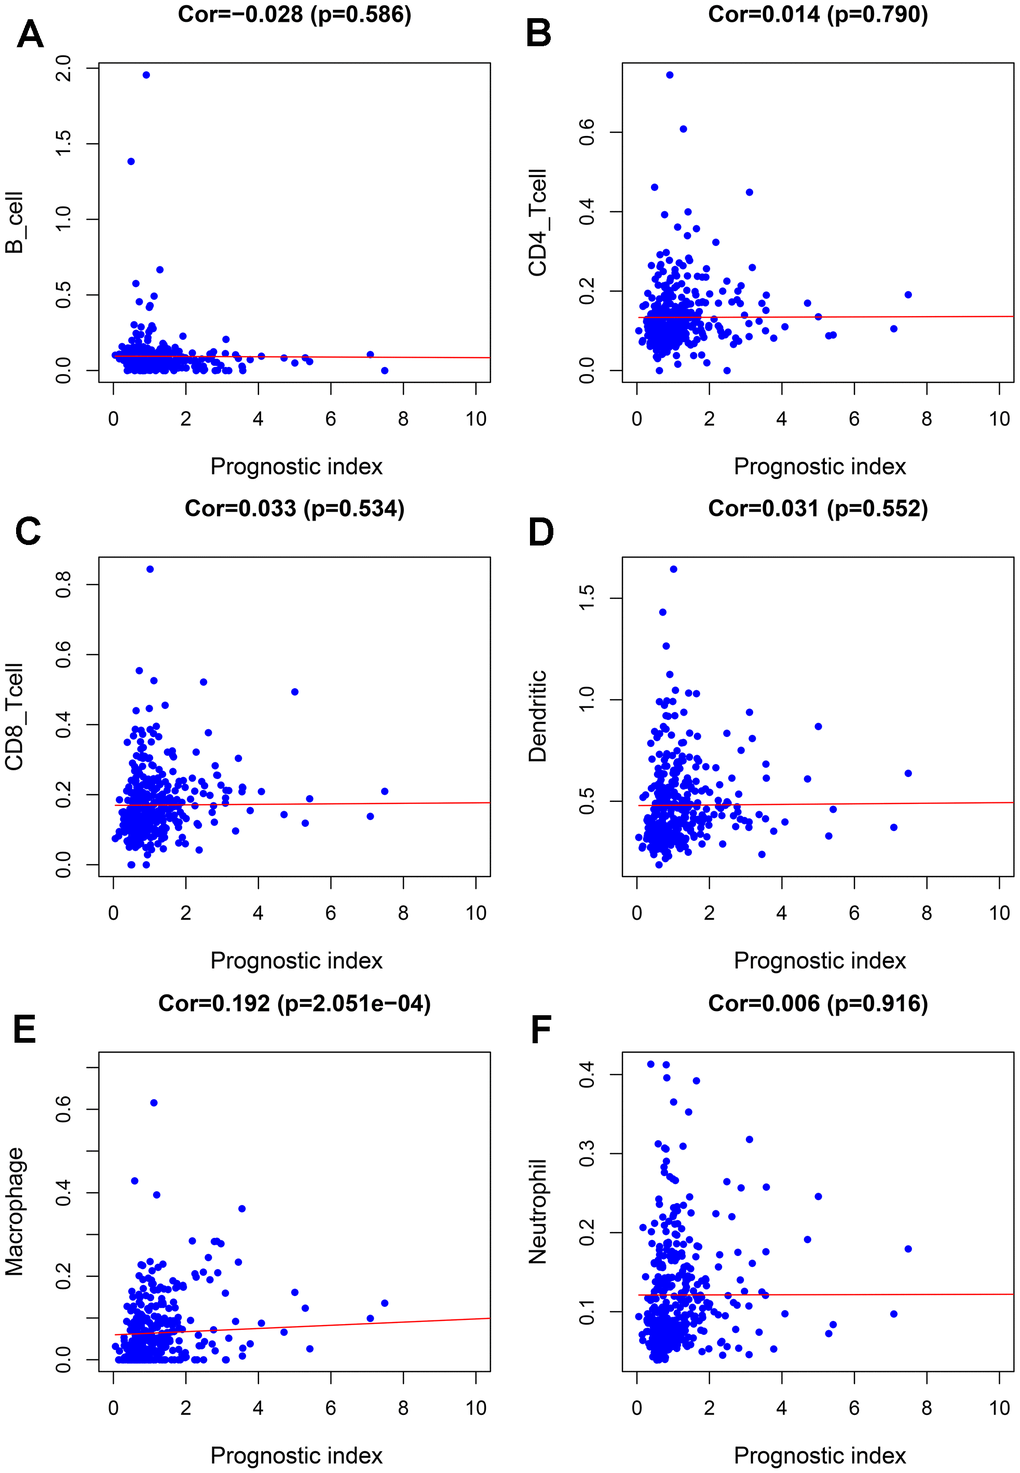 Relationships between the abundances of six types of immune cells and the immune-based prognostic index in patients with BLCA. (A) B cells; (B) CD4 T cells; (C) CD8 T cells; (D) dendritic cells; (E) macrophages; (F) neutrophils.